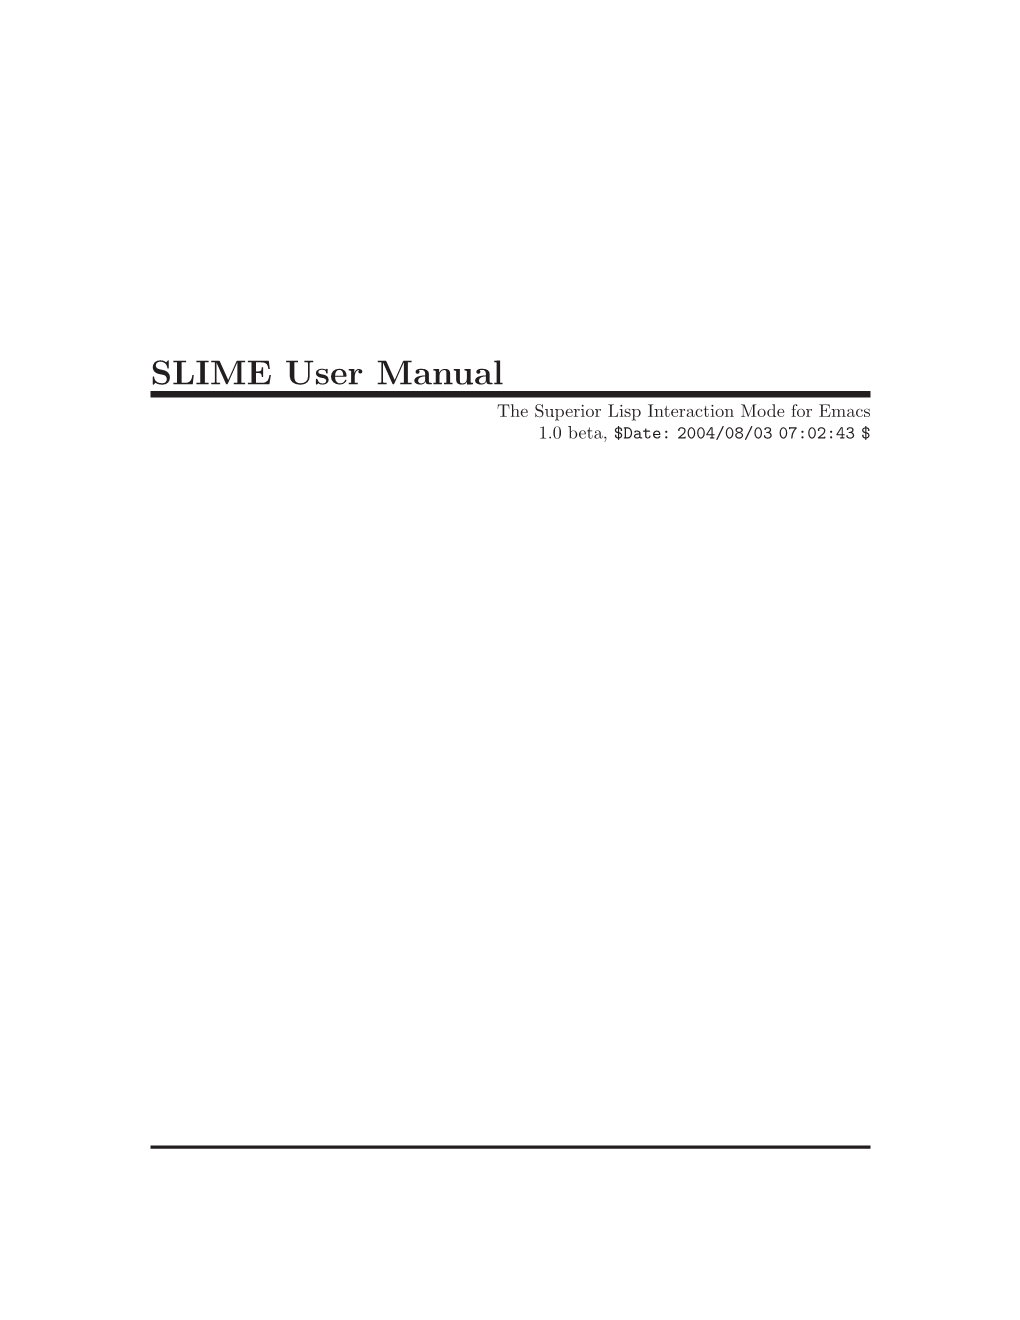 SLIME User Manual the Superior Lisp Interaction Mode for Emacs 1.0 Beta, $Date: 2004/08/03 07:02:43 $ I